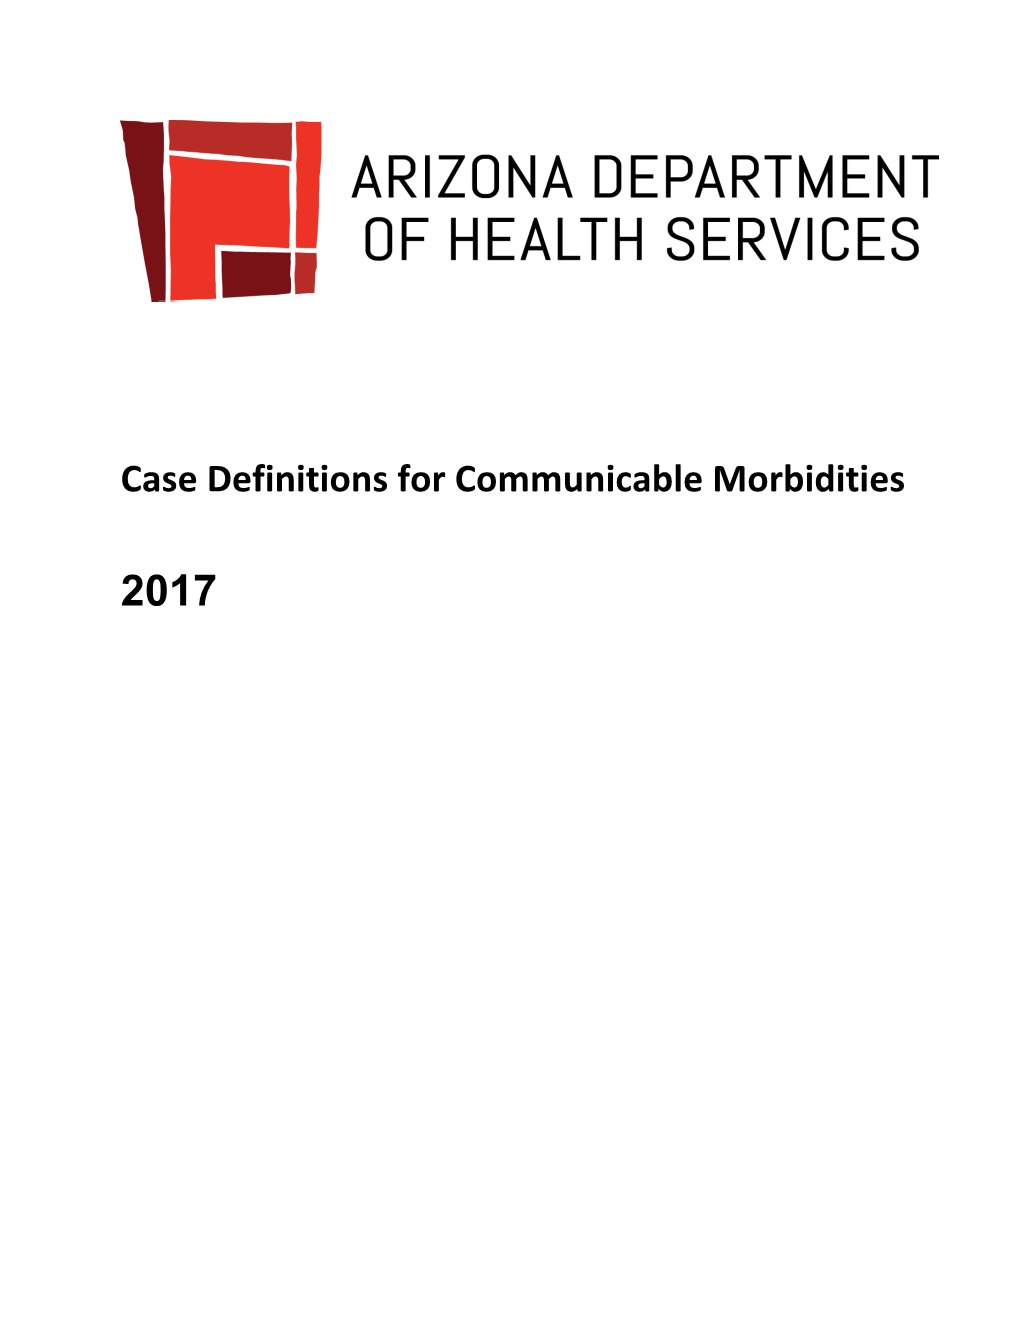 Case Definitions for Communicable Morbidities